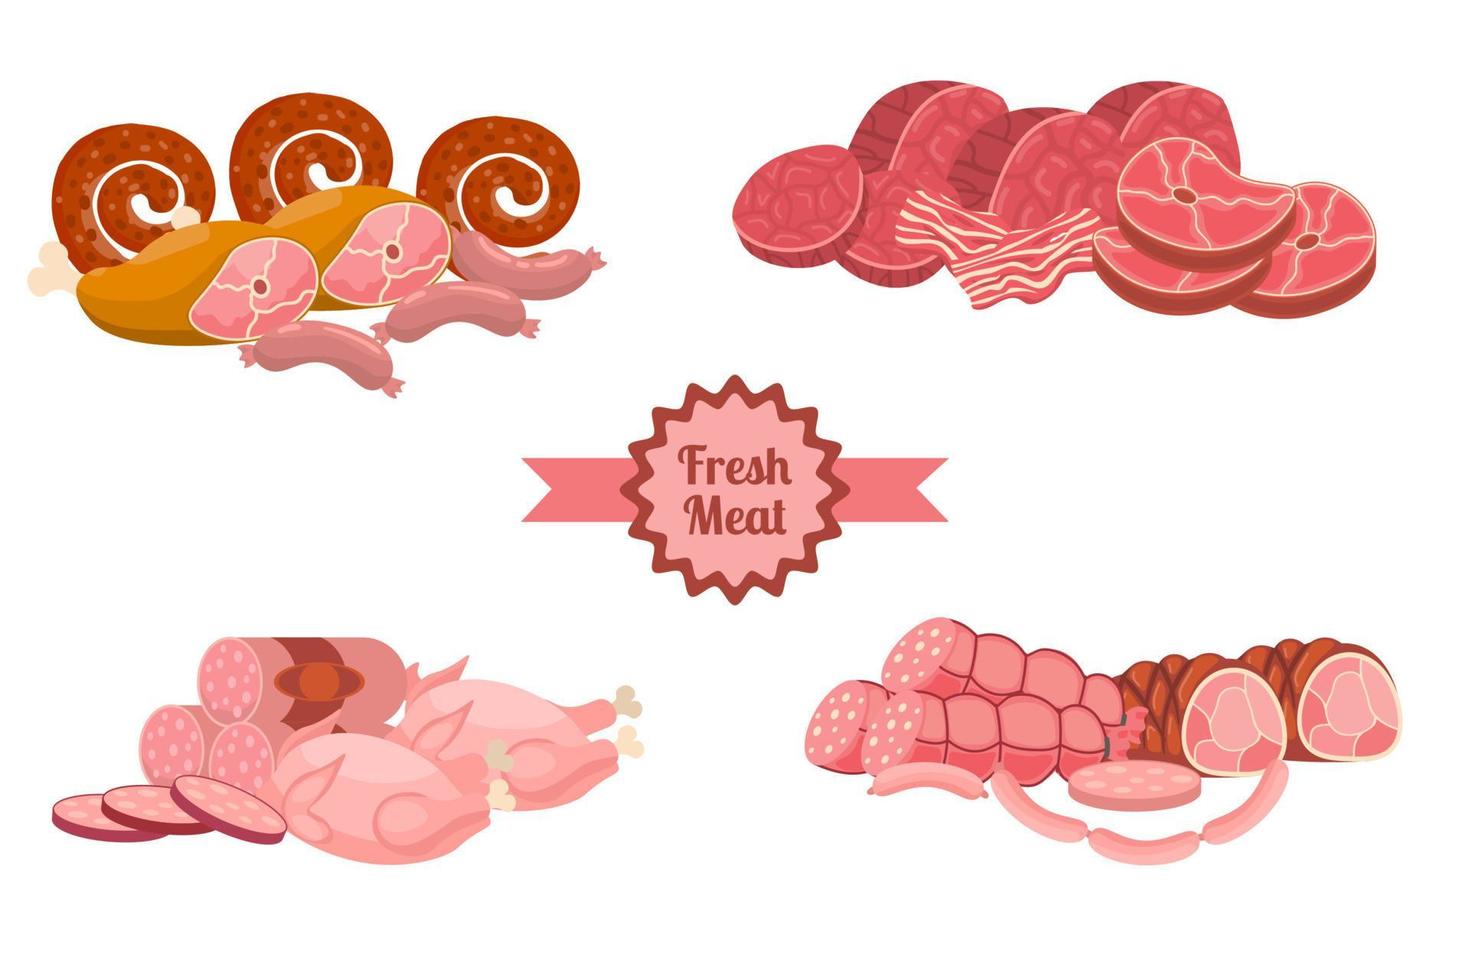 Cartoon fresh meat products compositions in flat style. Chicken and bacon, steak and sausages, Krakow sausage and ham, tenderloin. Meat and ingredients. vector